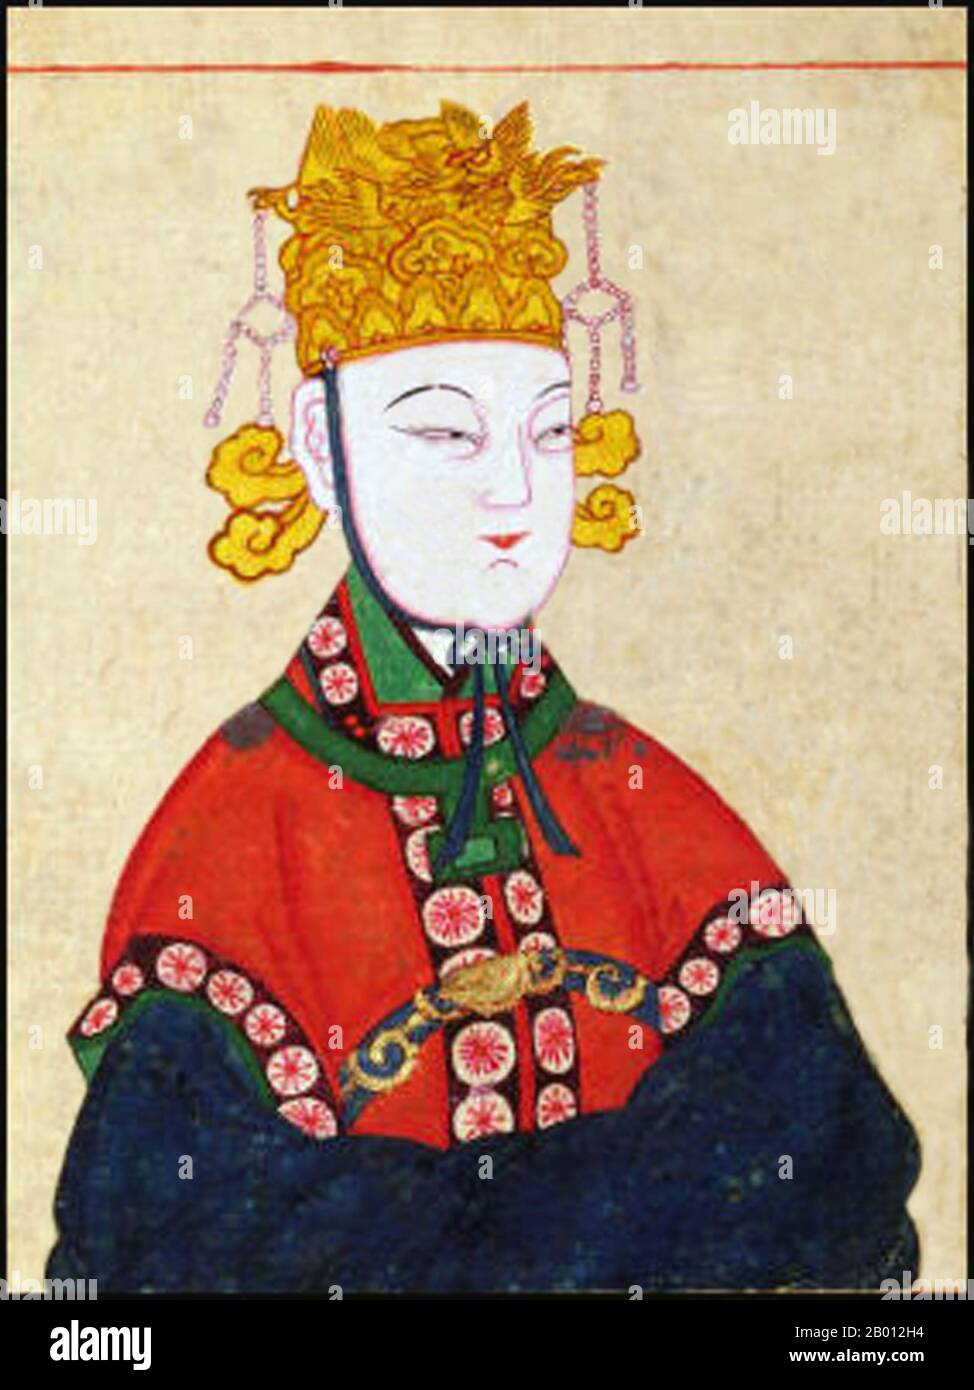 China: Wu Zetian (624-705), Empress Regnant of the Zhou Dynasty (690-705). Gouache on paper.  Wu Zetian (624-705), personal name Wu Zhao, often referred to as Tian Hou during the Tang Dynasty and Empress Consort Wu in later times, was the only woman in the history of China to assume the title of Empress Regnant. As de facto ruler of China first through her husband and her sons from 665 to 690, not unprecedented in Chinese history, she then broke all precedents when she founded her own dynasty in 690, the Zhou (interrupting the Tang Dynasty), and ruled personally. Stock Photo